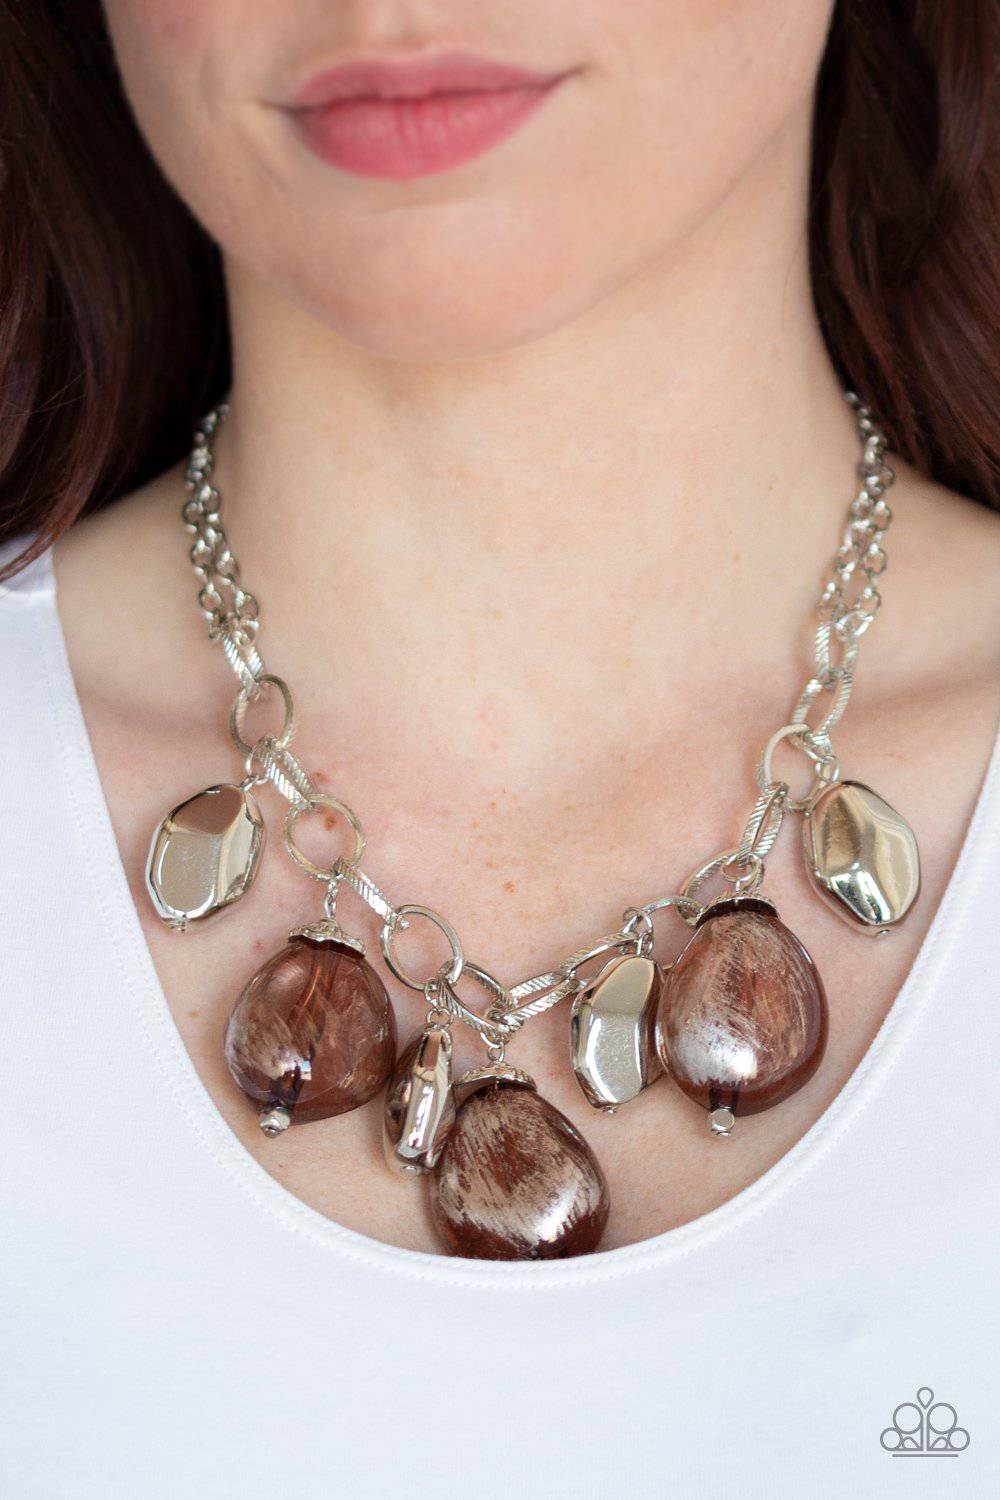 Looking Glass Glamorous - Brown Oversized Glassy Bead Necklace - Paparazzi Accessories - GlaMarous Titi Jewels